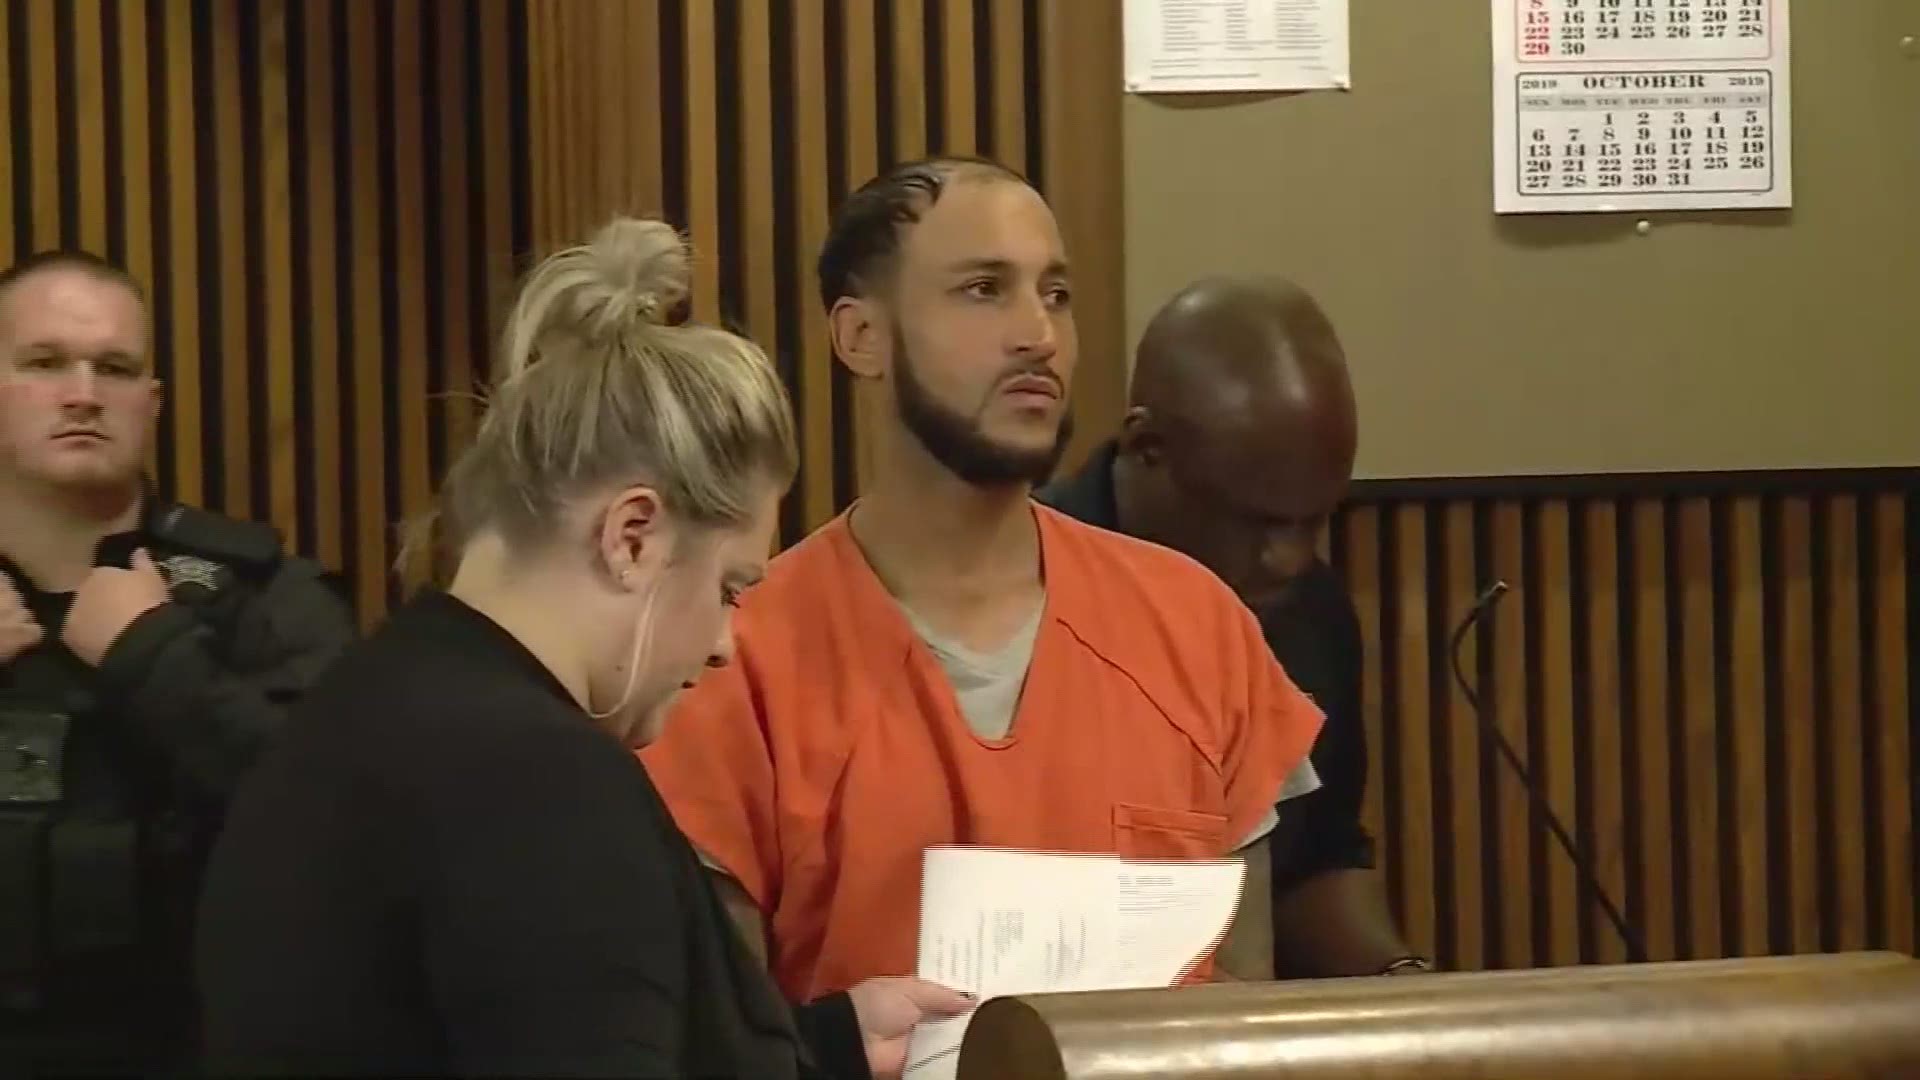 Sept. 23, 2019: Bond was set at $2 million for Eric Maldonado, who is being held on several charges, including aggravated vehicular homicide and kidnapping.